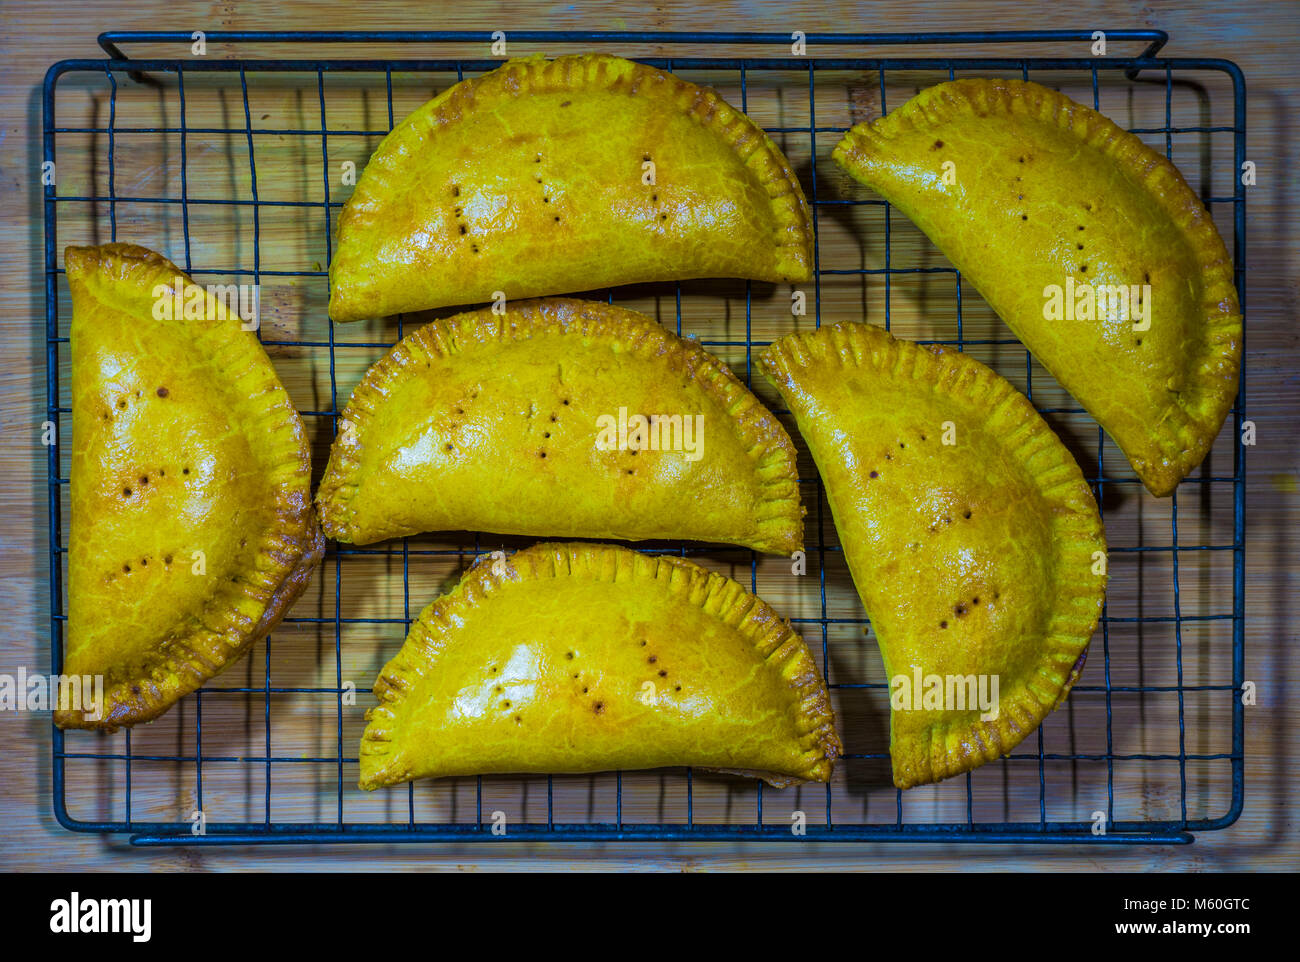 Savoury baked Jamaican patties - authentic Caribbean cuisine - fresh from the oven, and cooling down on mesh, ready to eat. Stock Photo